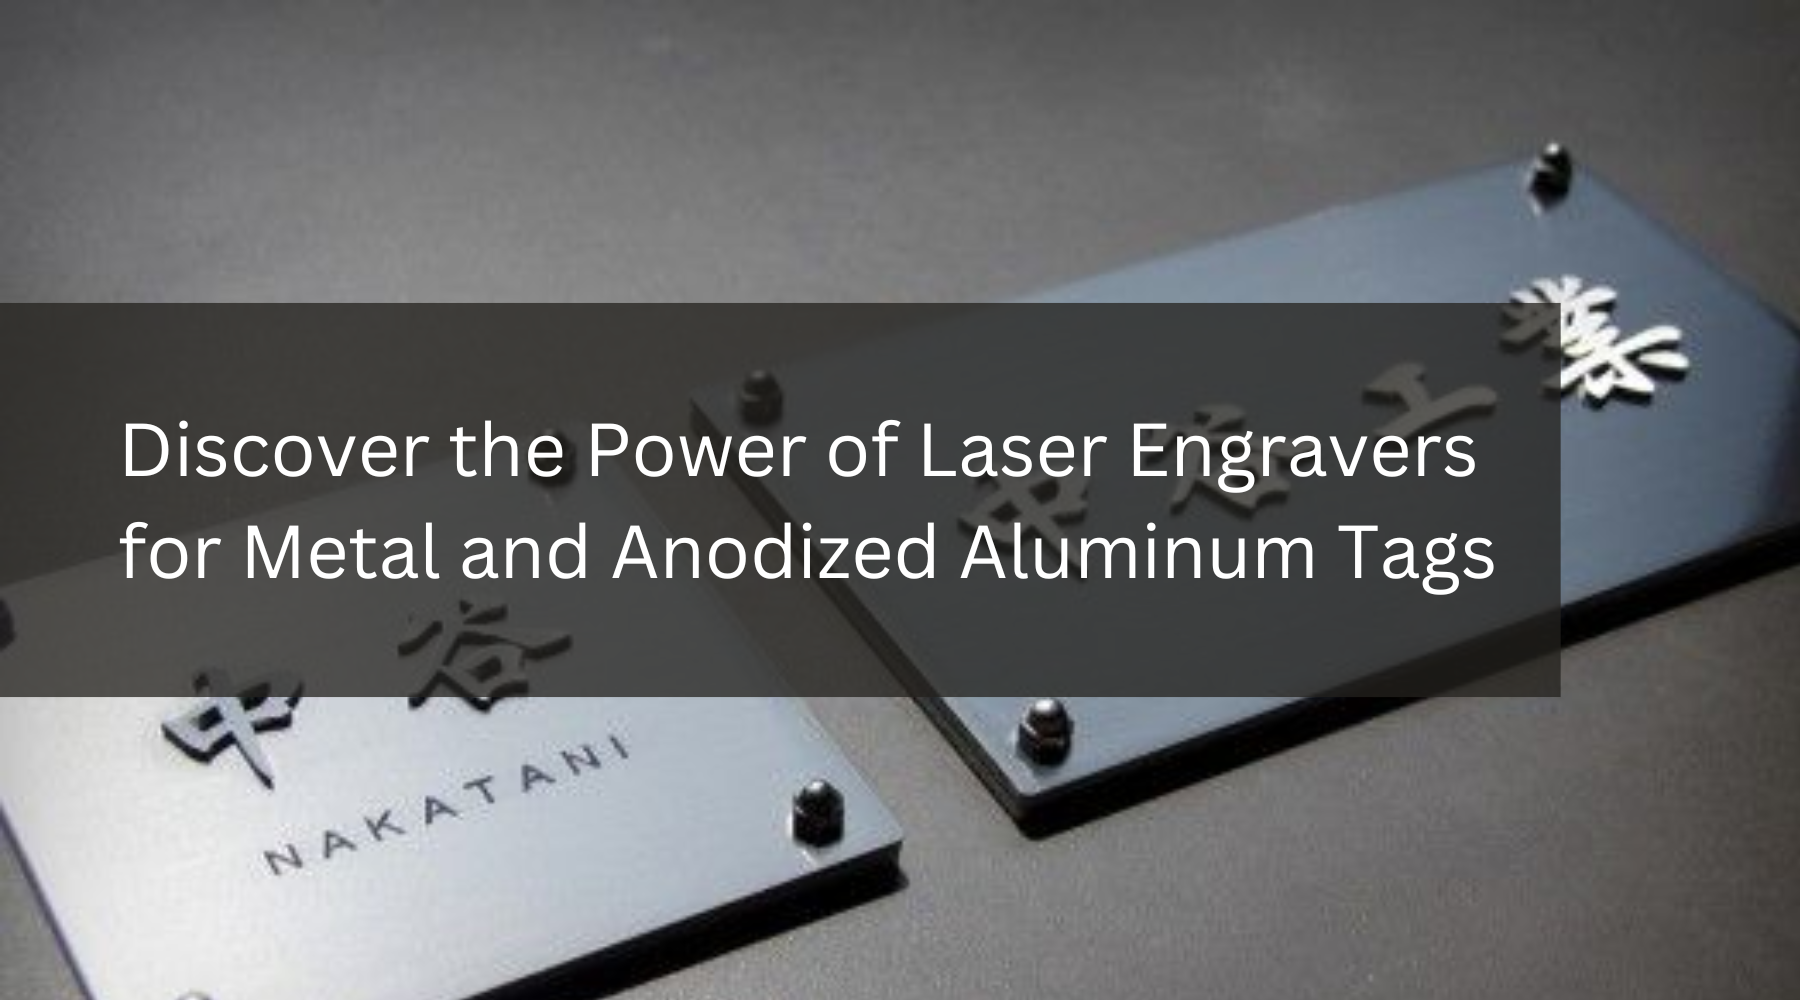 Discover the Power of Laser Engravers for Metal and Anodized Aluminum Tags